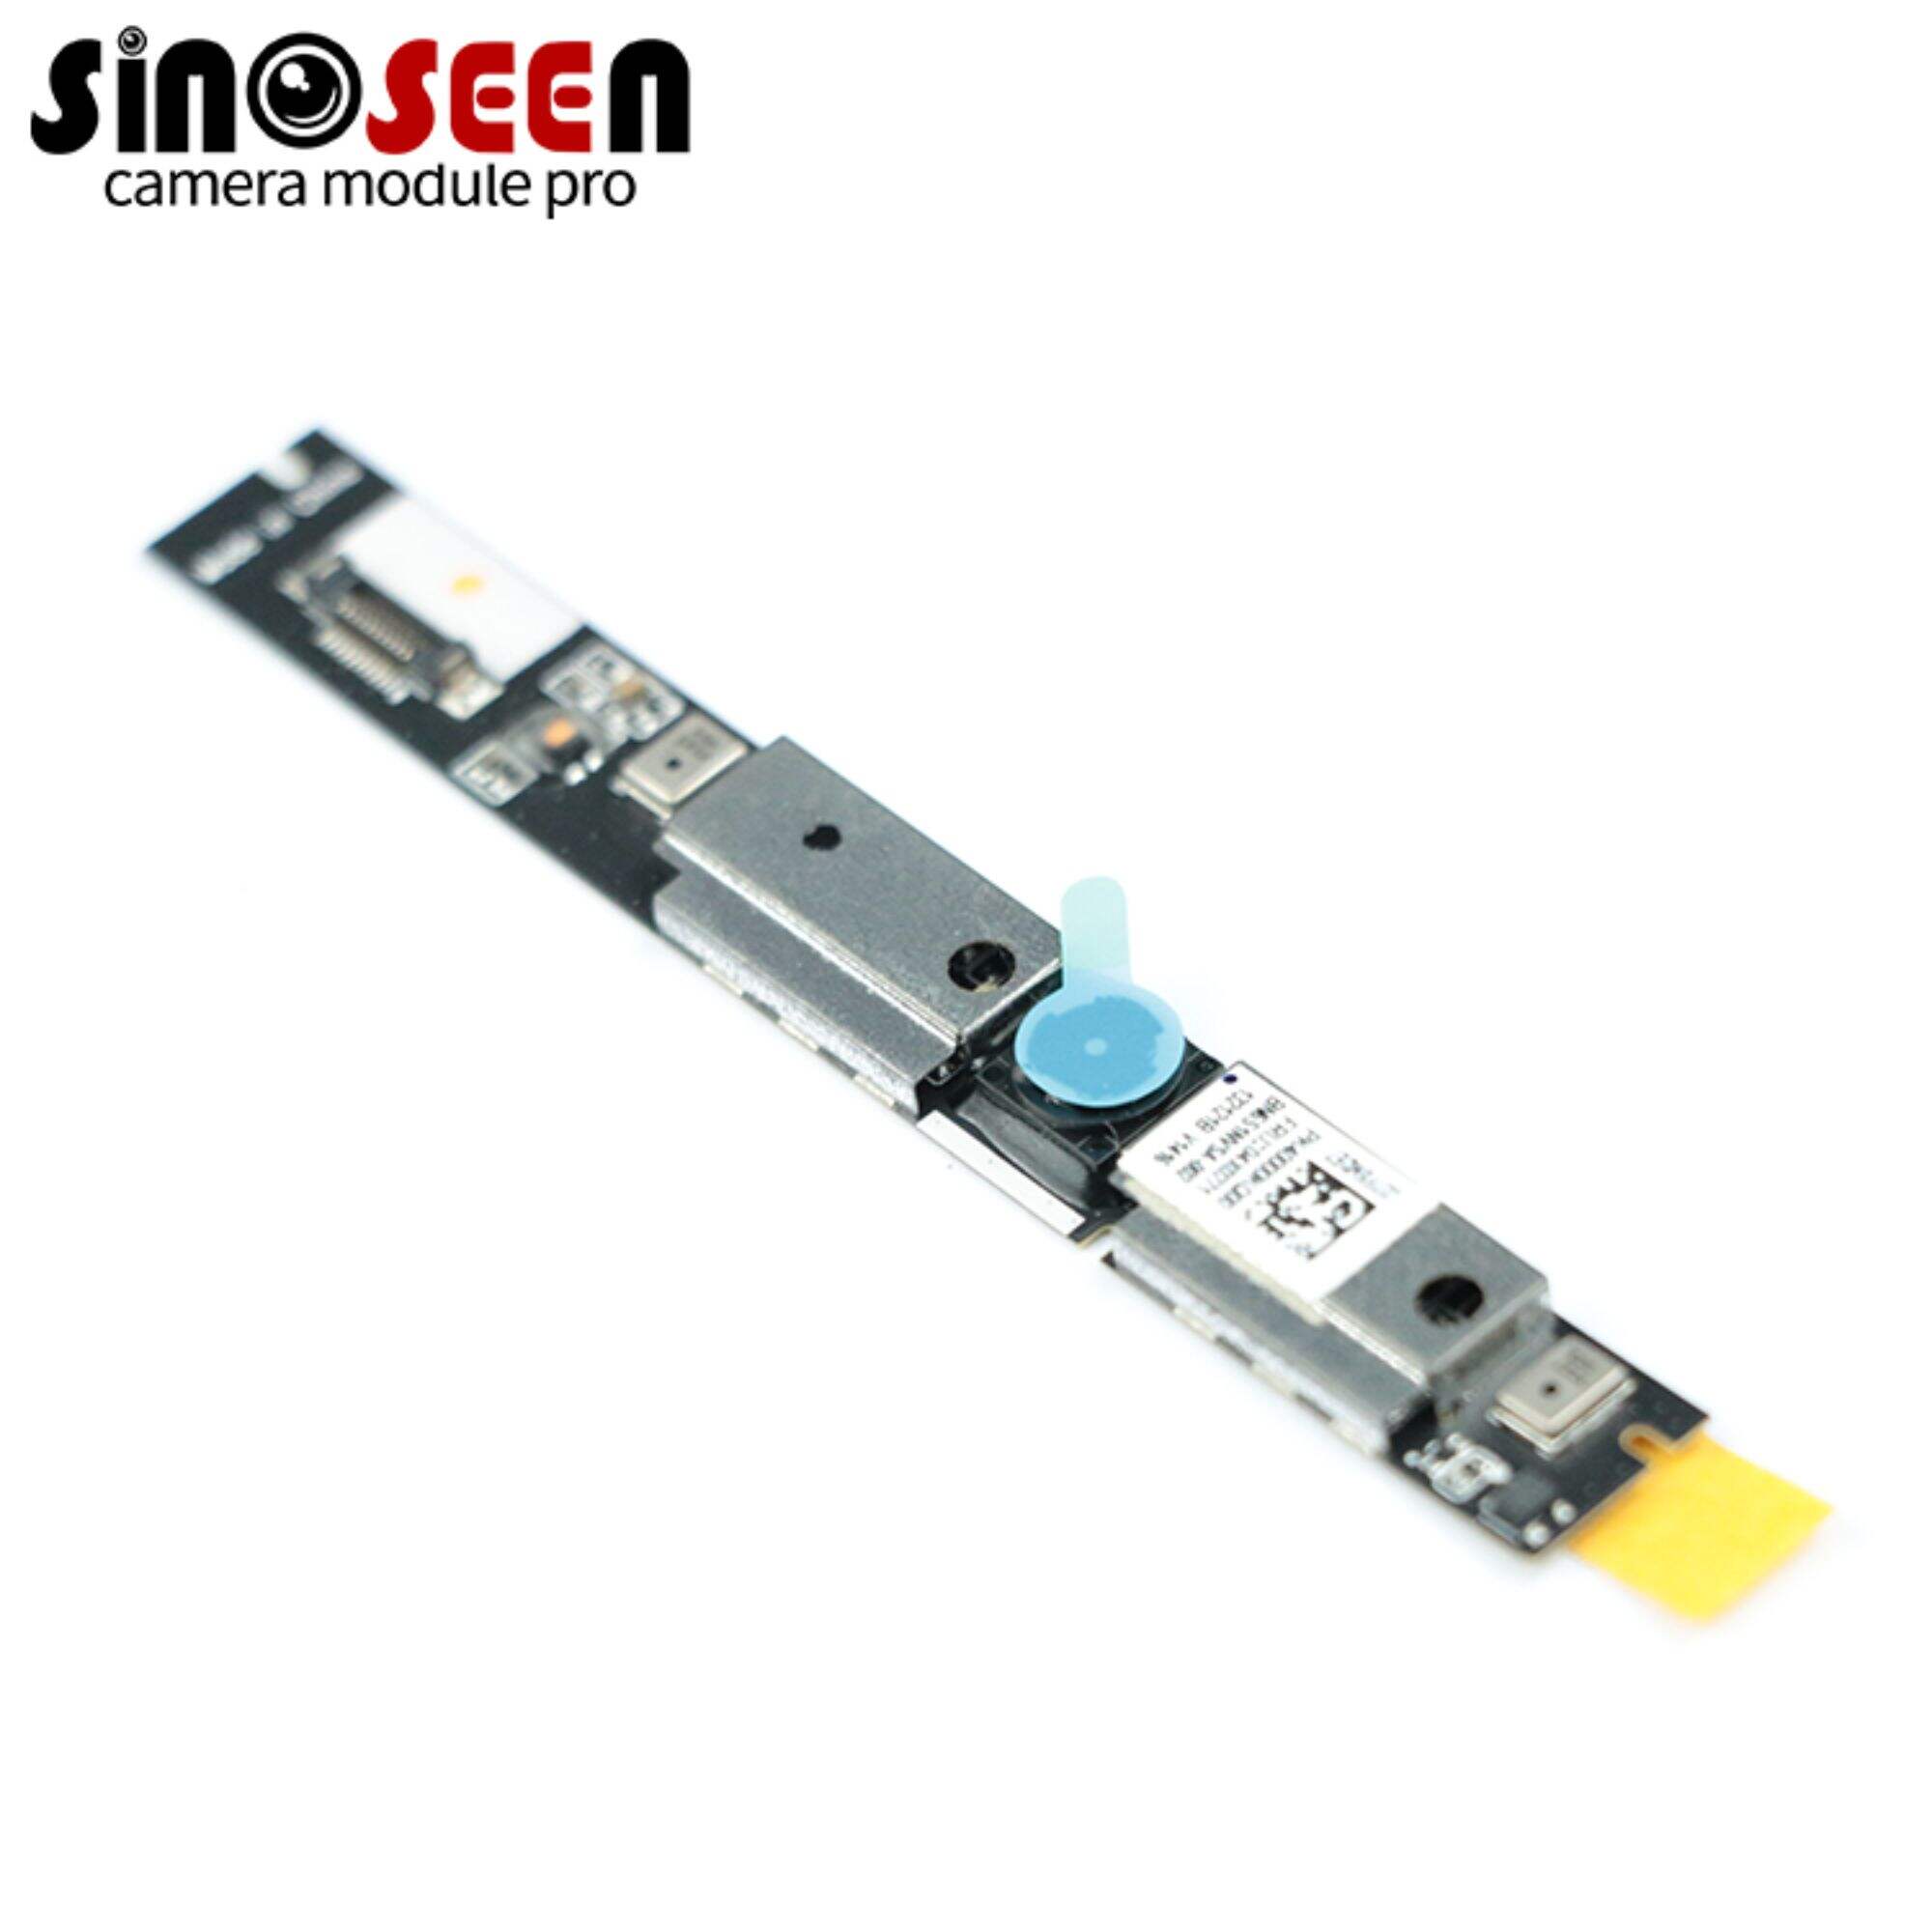 Refurbished Notebook Webcam Camera Module Replacements For Lenovo T440